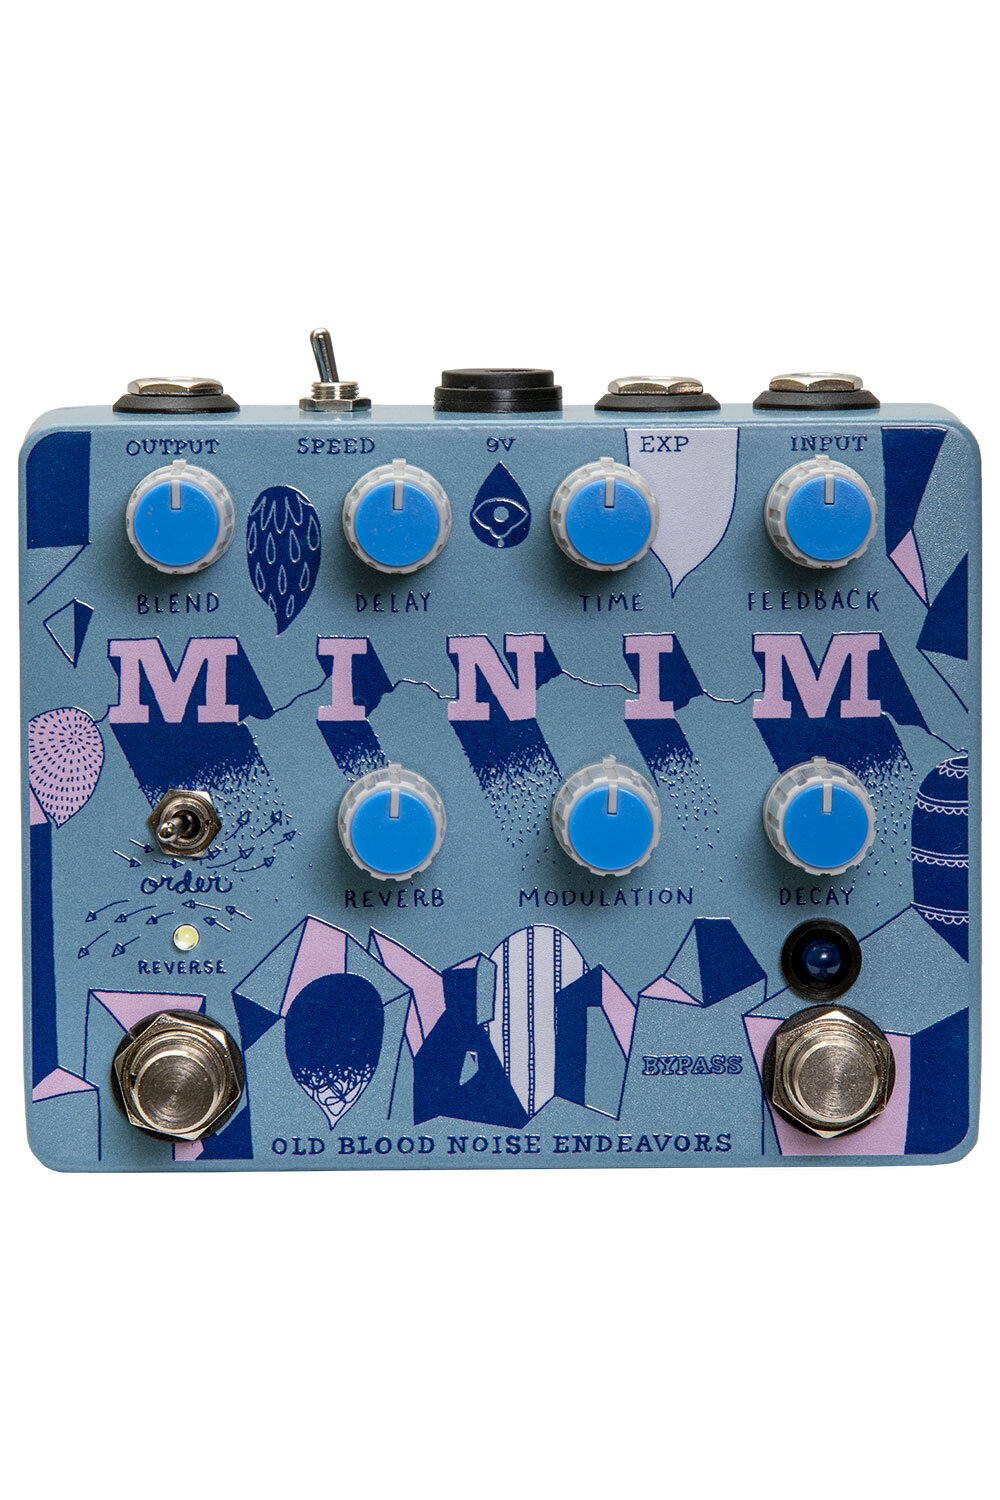 old blood noise endeavors — Minim Reverb Delay and Reverse Beta 